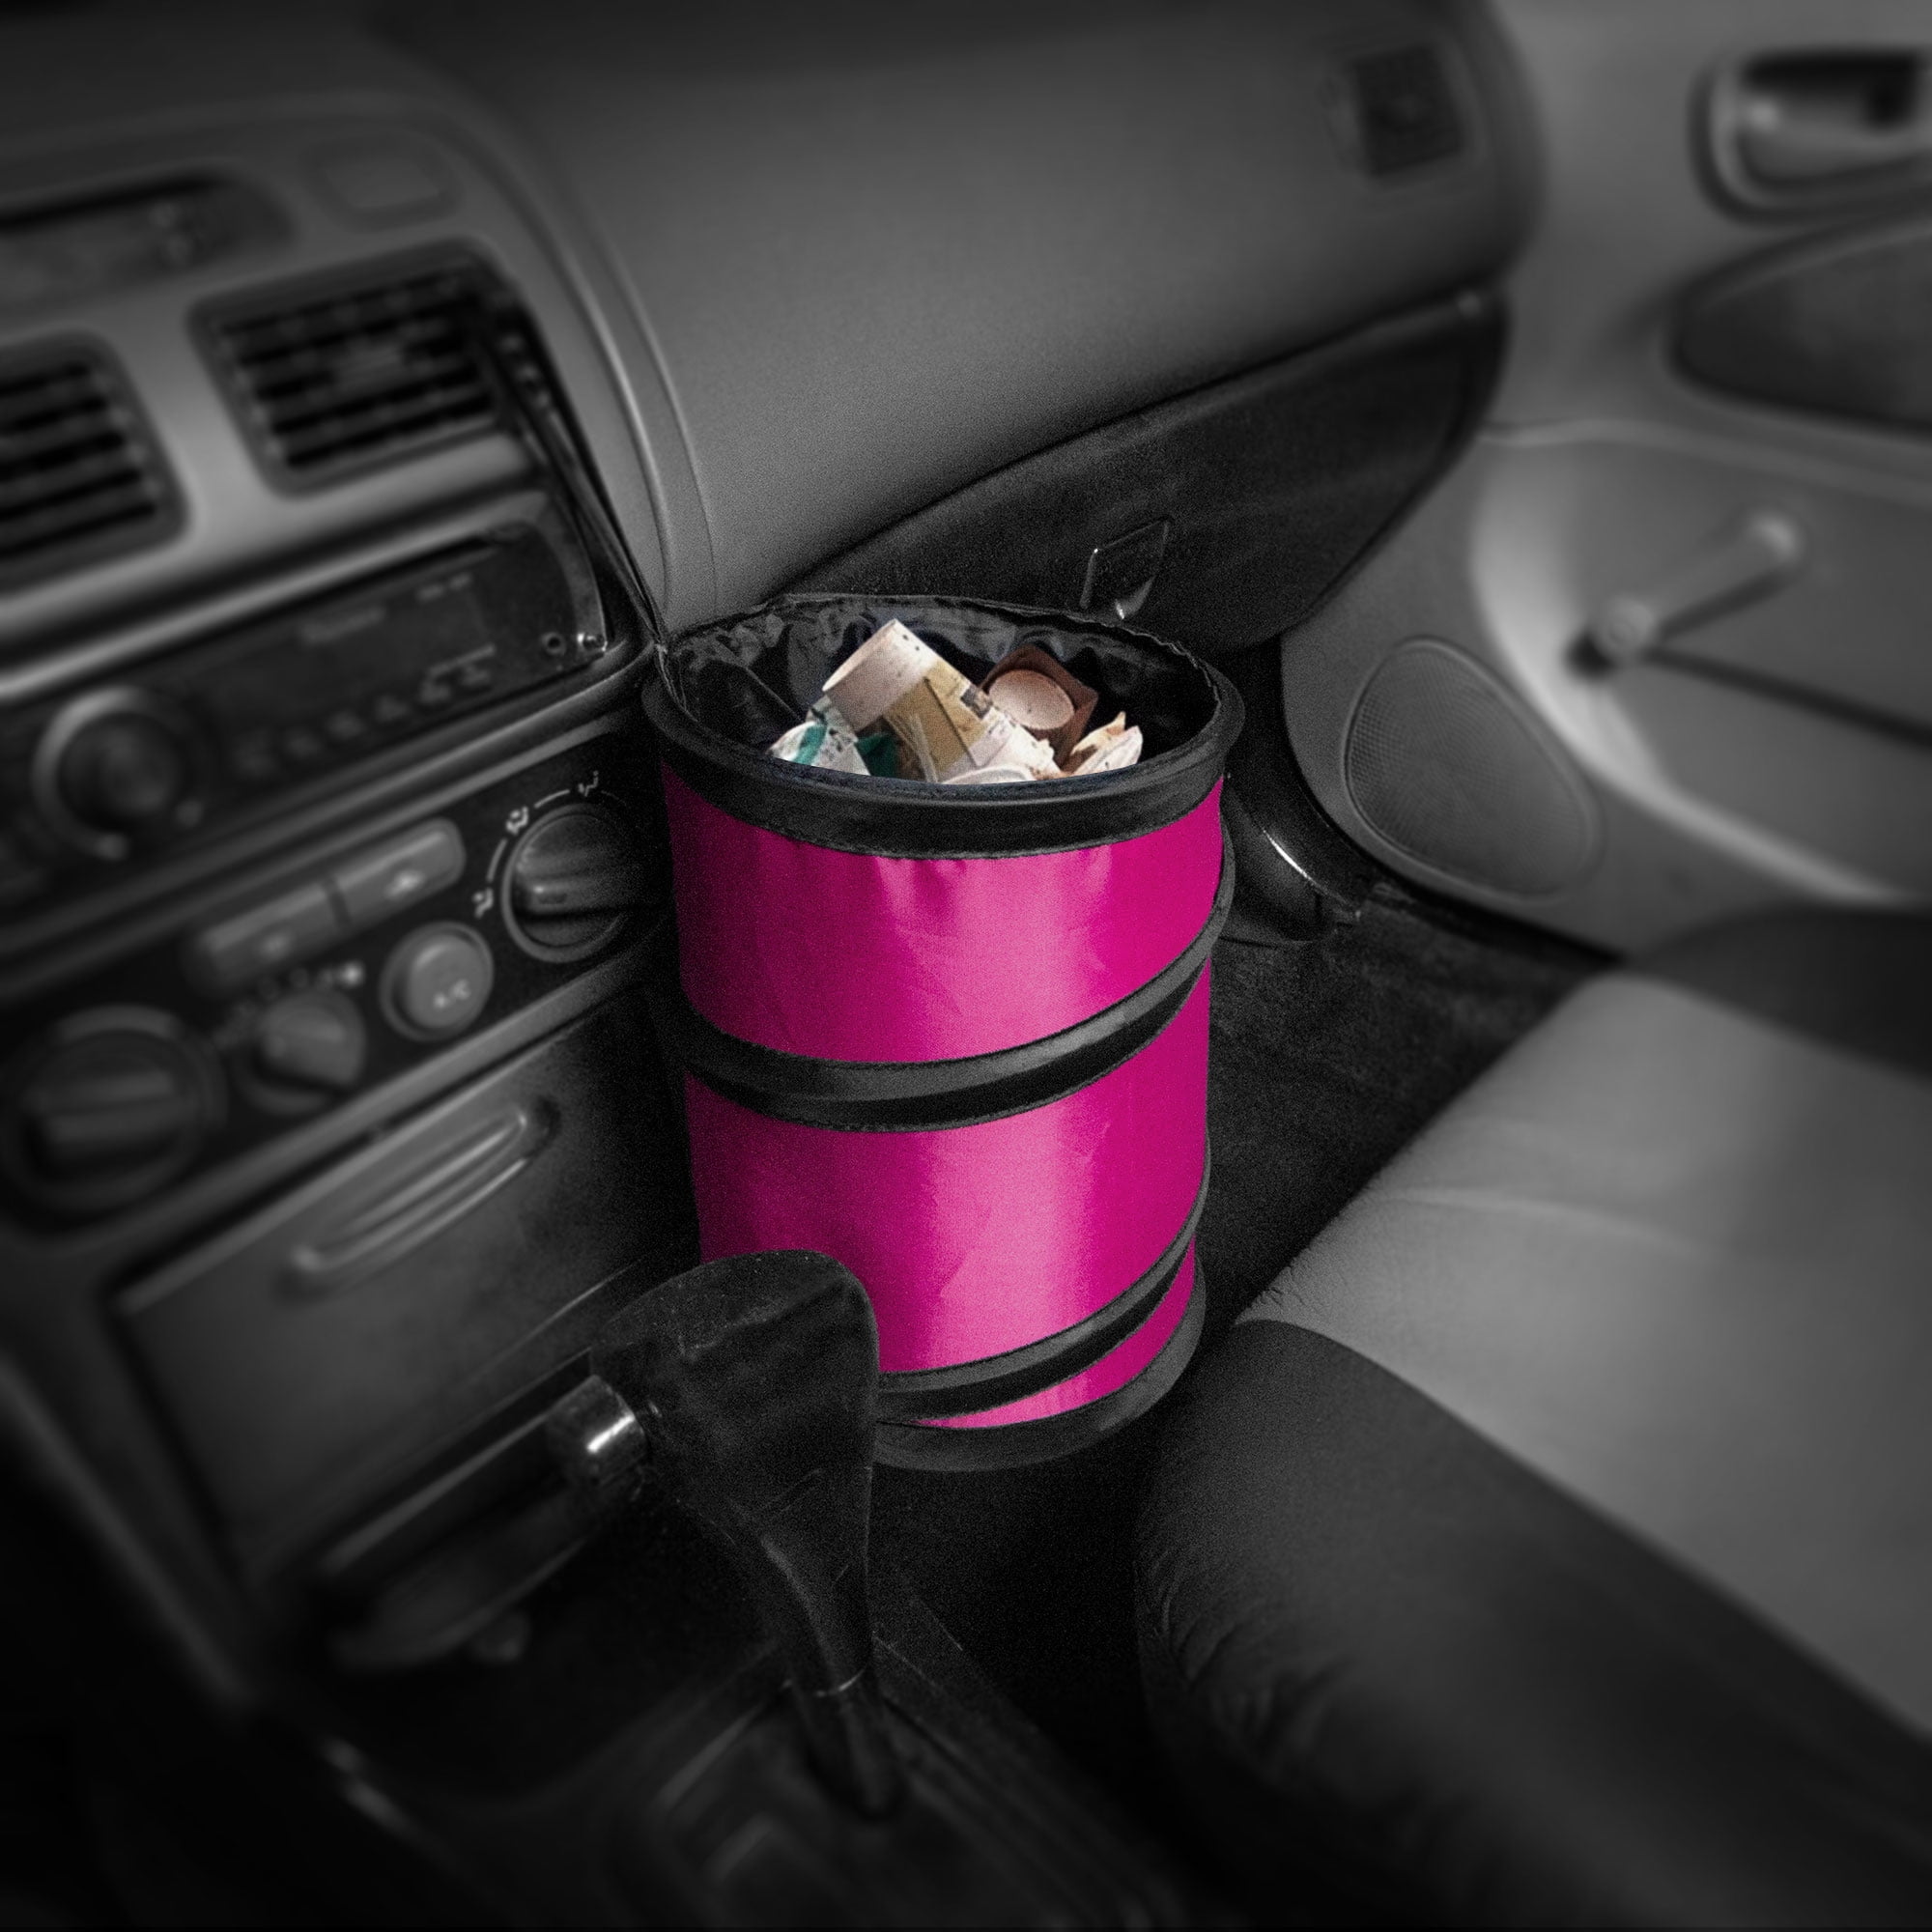 Collapsible Car Garbage Can with Clip Vetoo Portable Car Trash Can with Lid 100% Waterproof Traveling Car Trash Bag Cup Holder for Storage Premium Leakproof Car Container Hanging for Headrest 